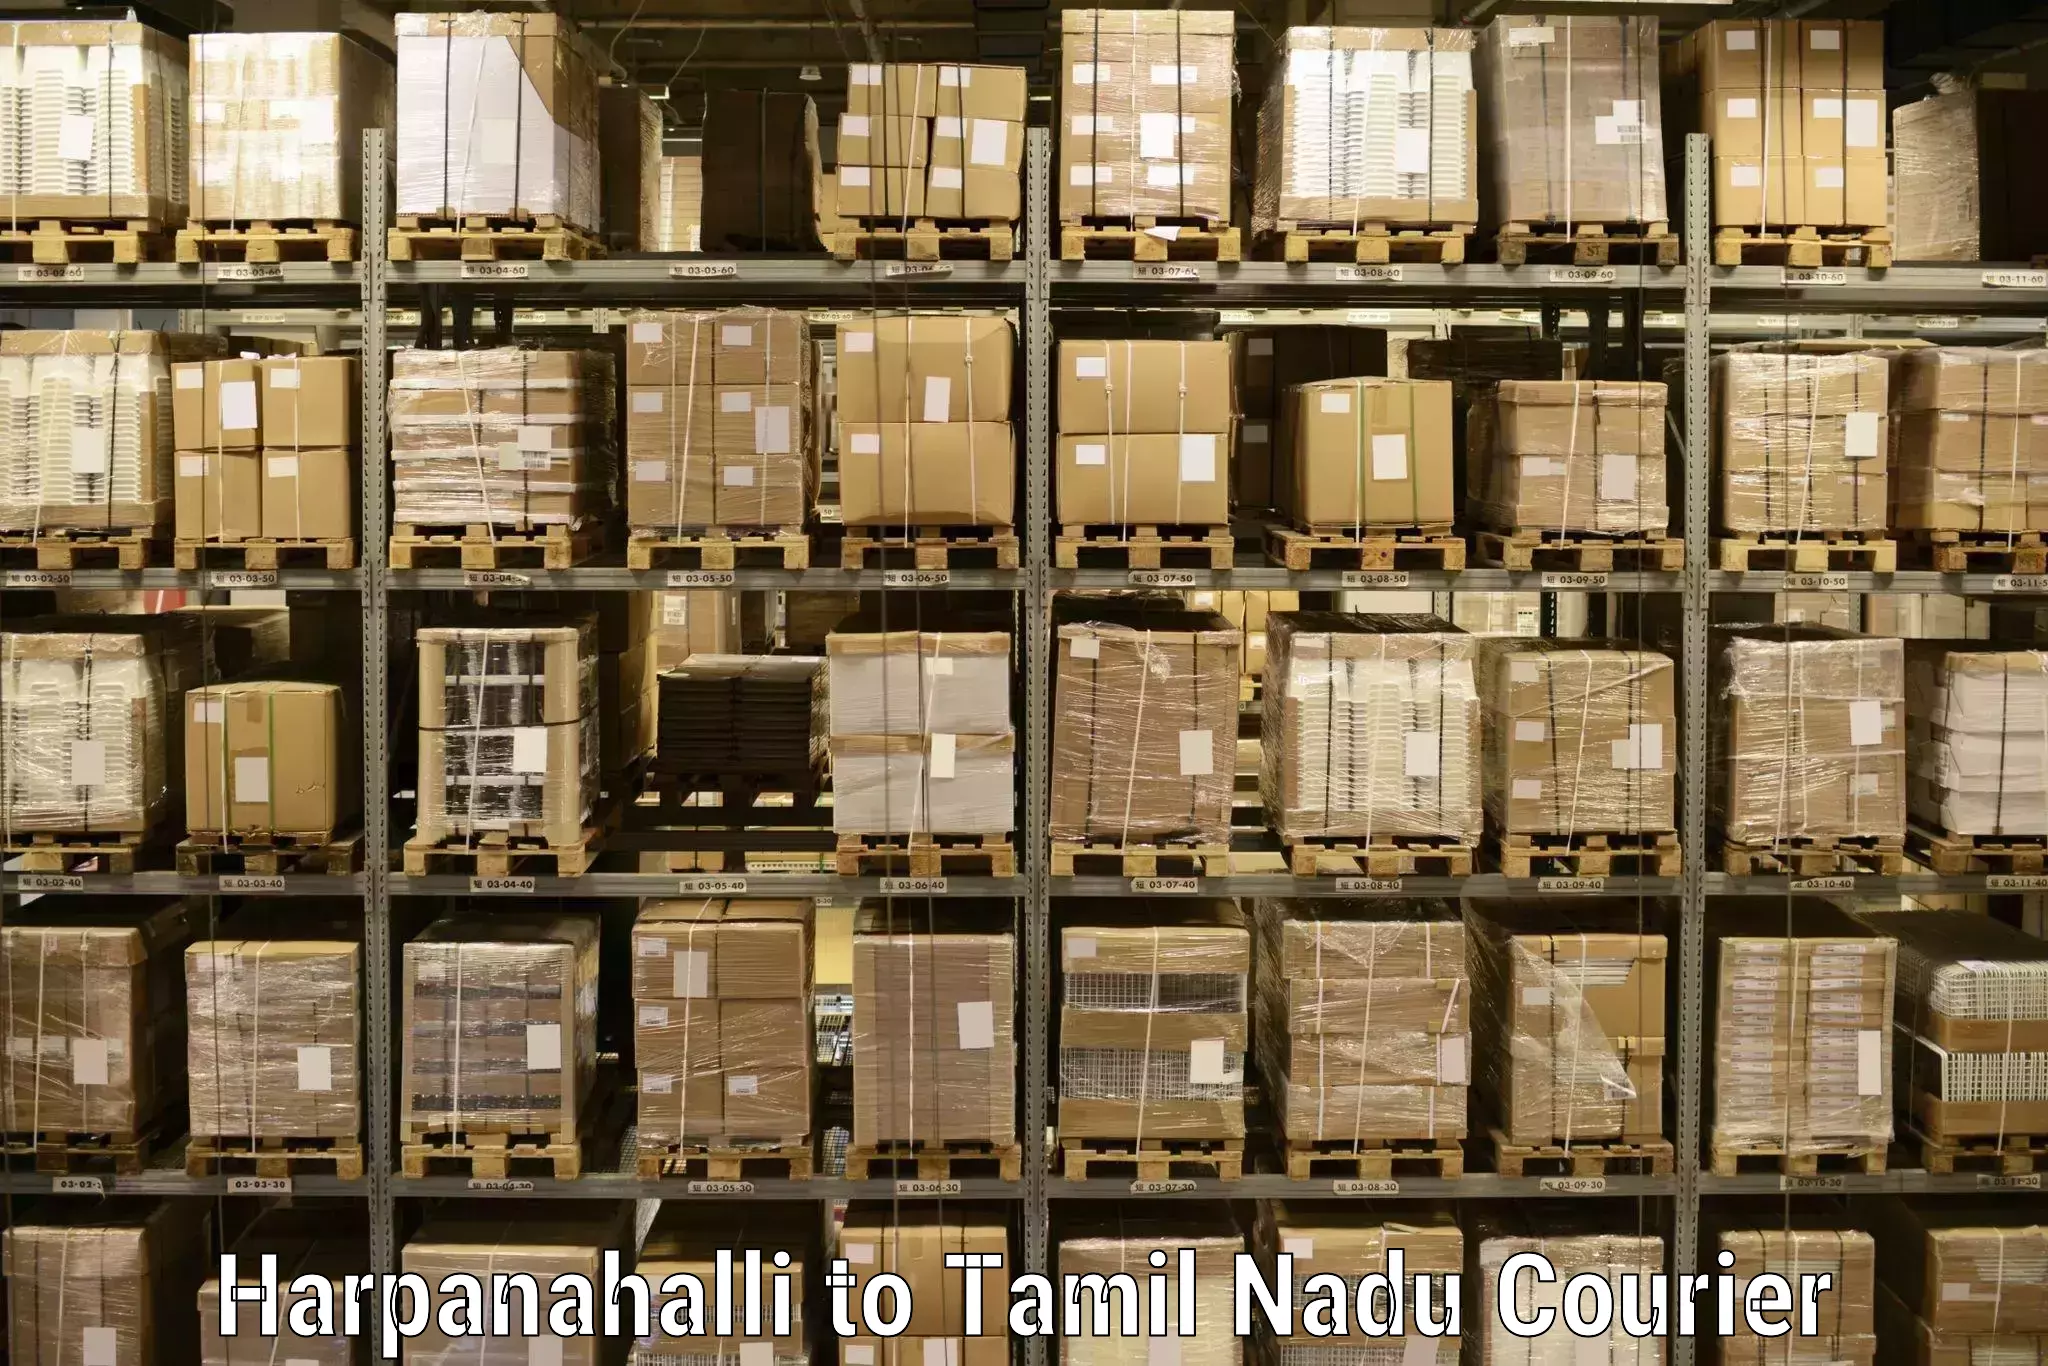 Reliable courier service Harpanahalli to Vriddhachalam